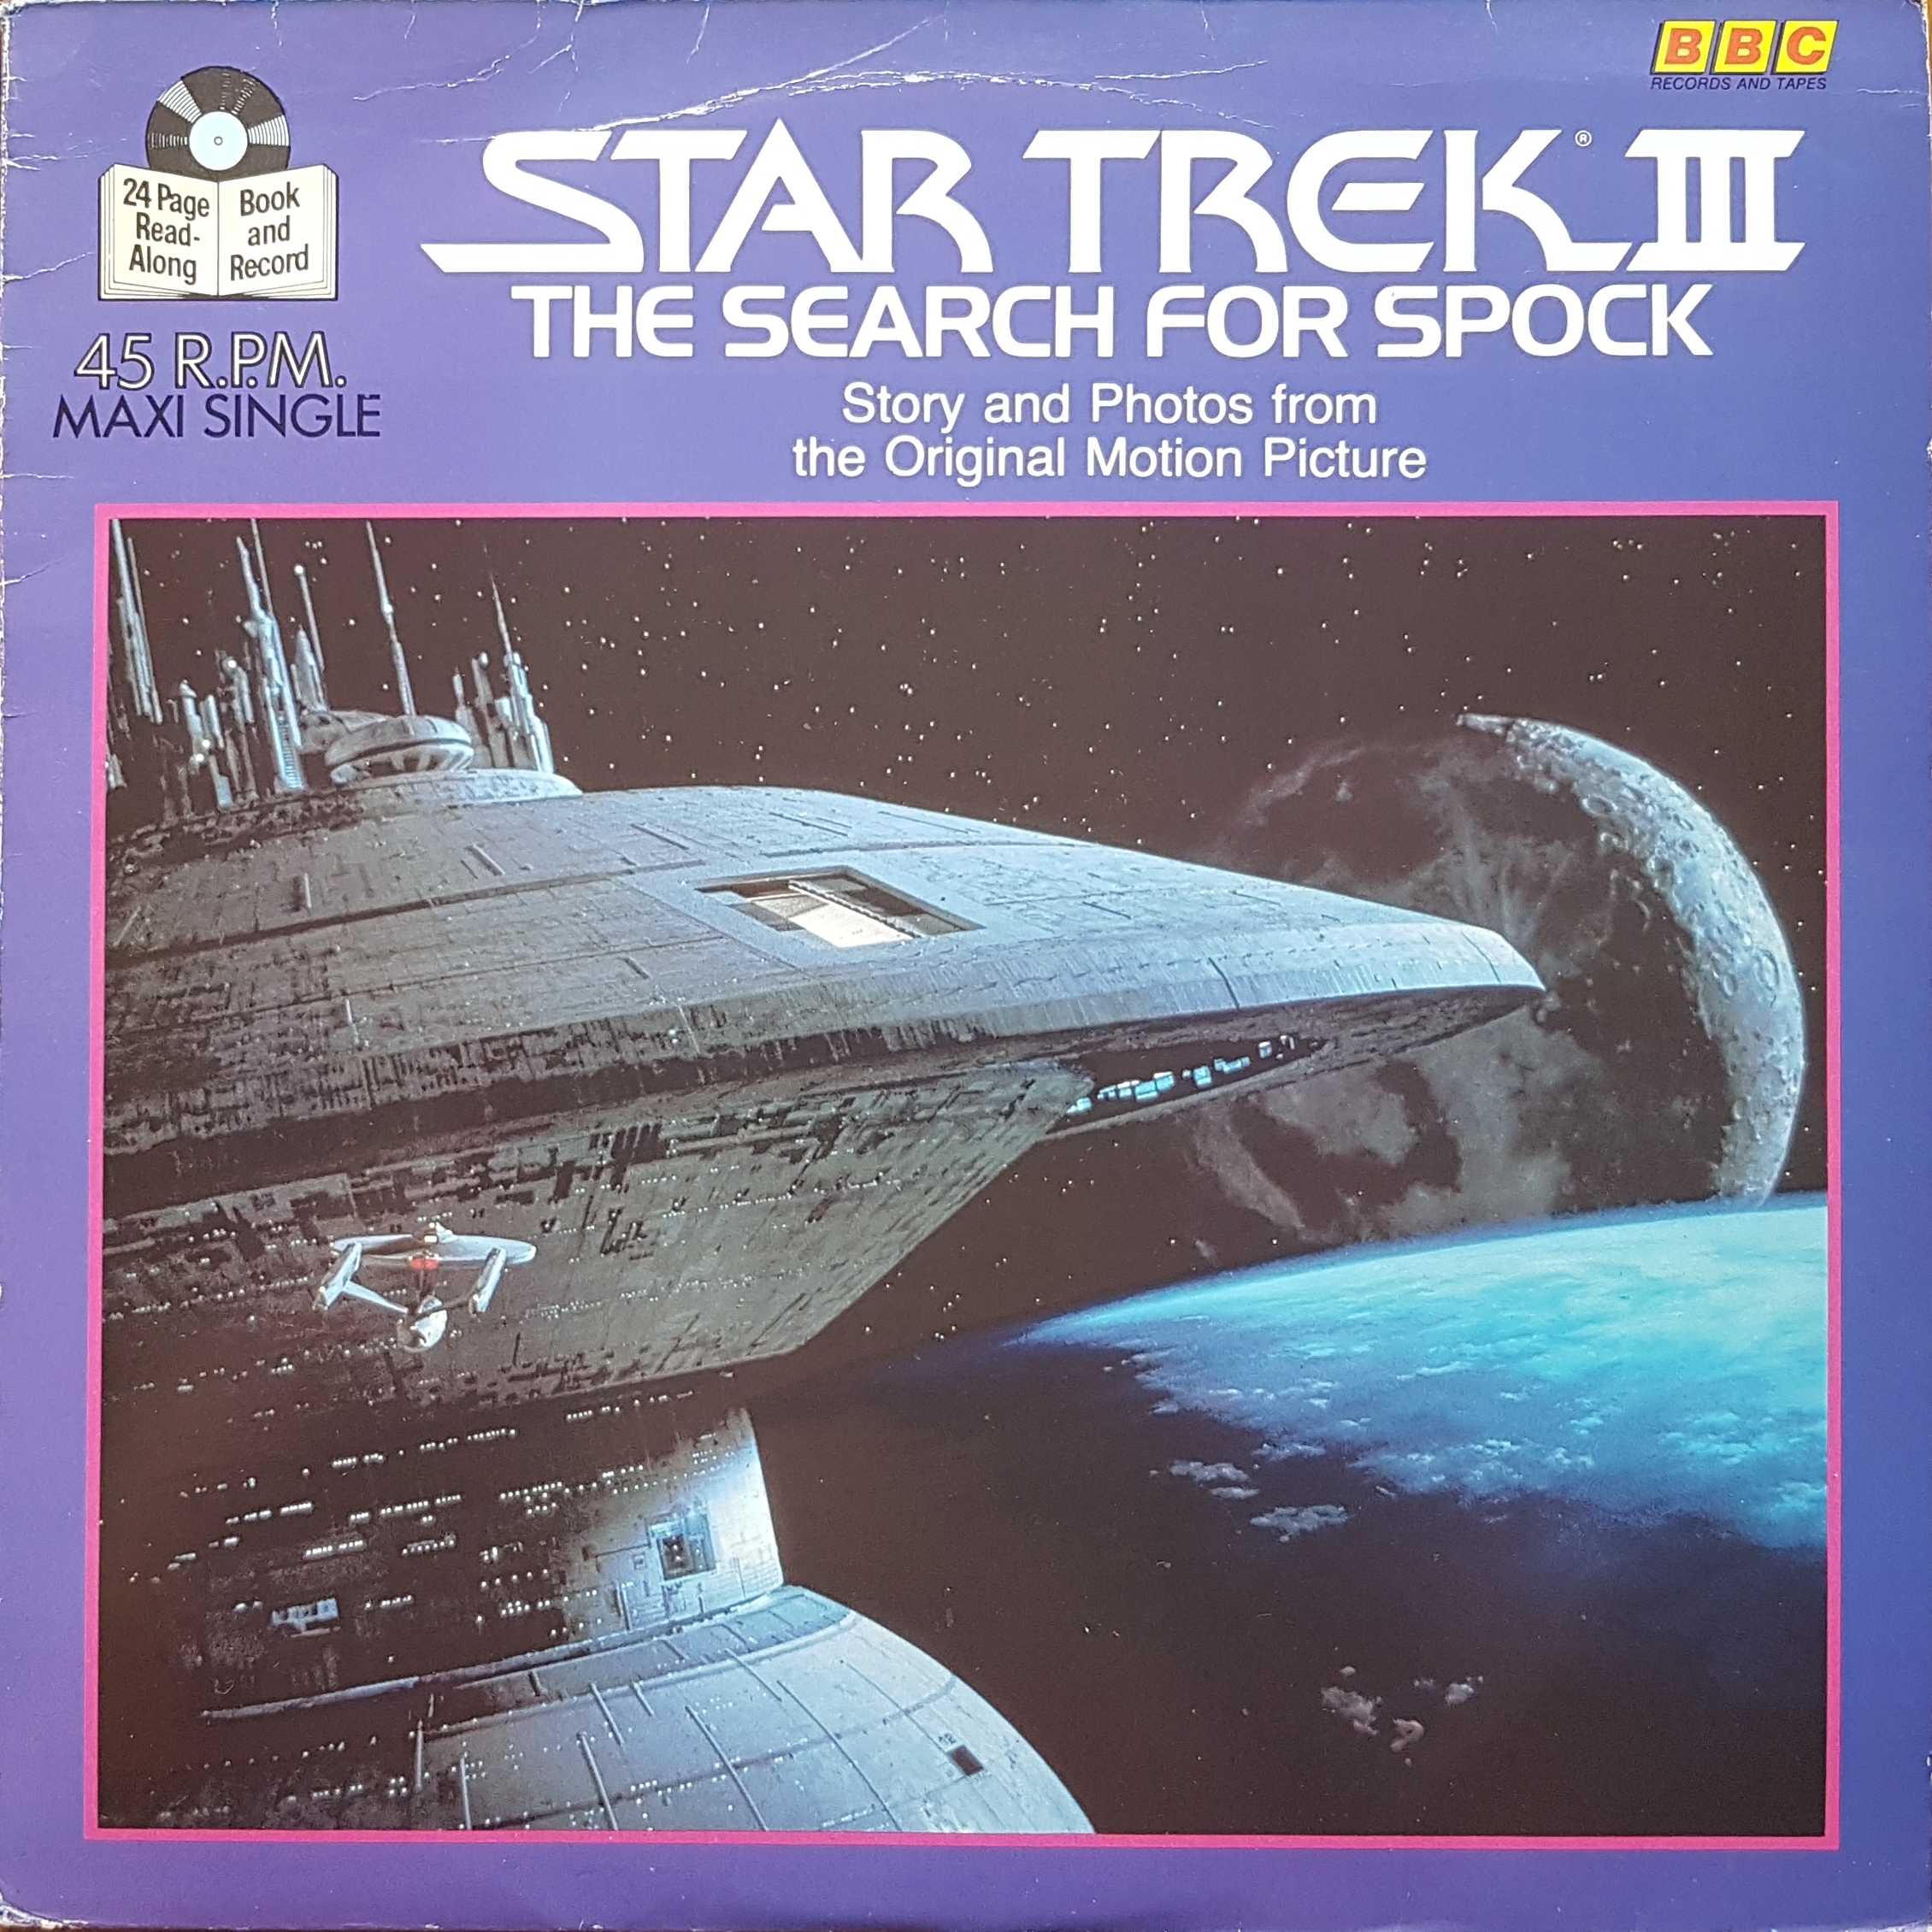 Picture of RESLD 002 Star trek III - The search for Spock by artist Unknown from the BBC 12inches - Records and Tapes library